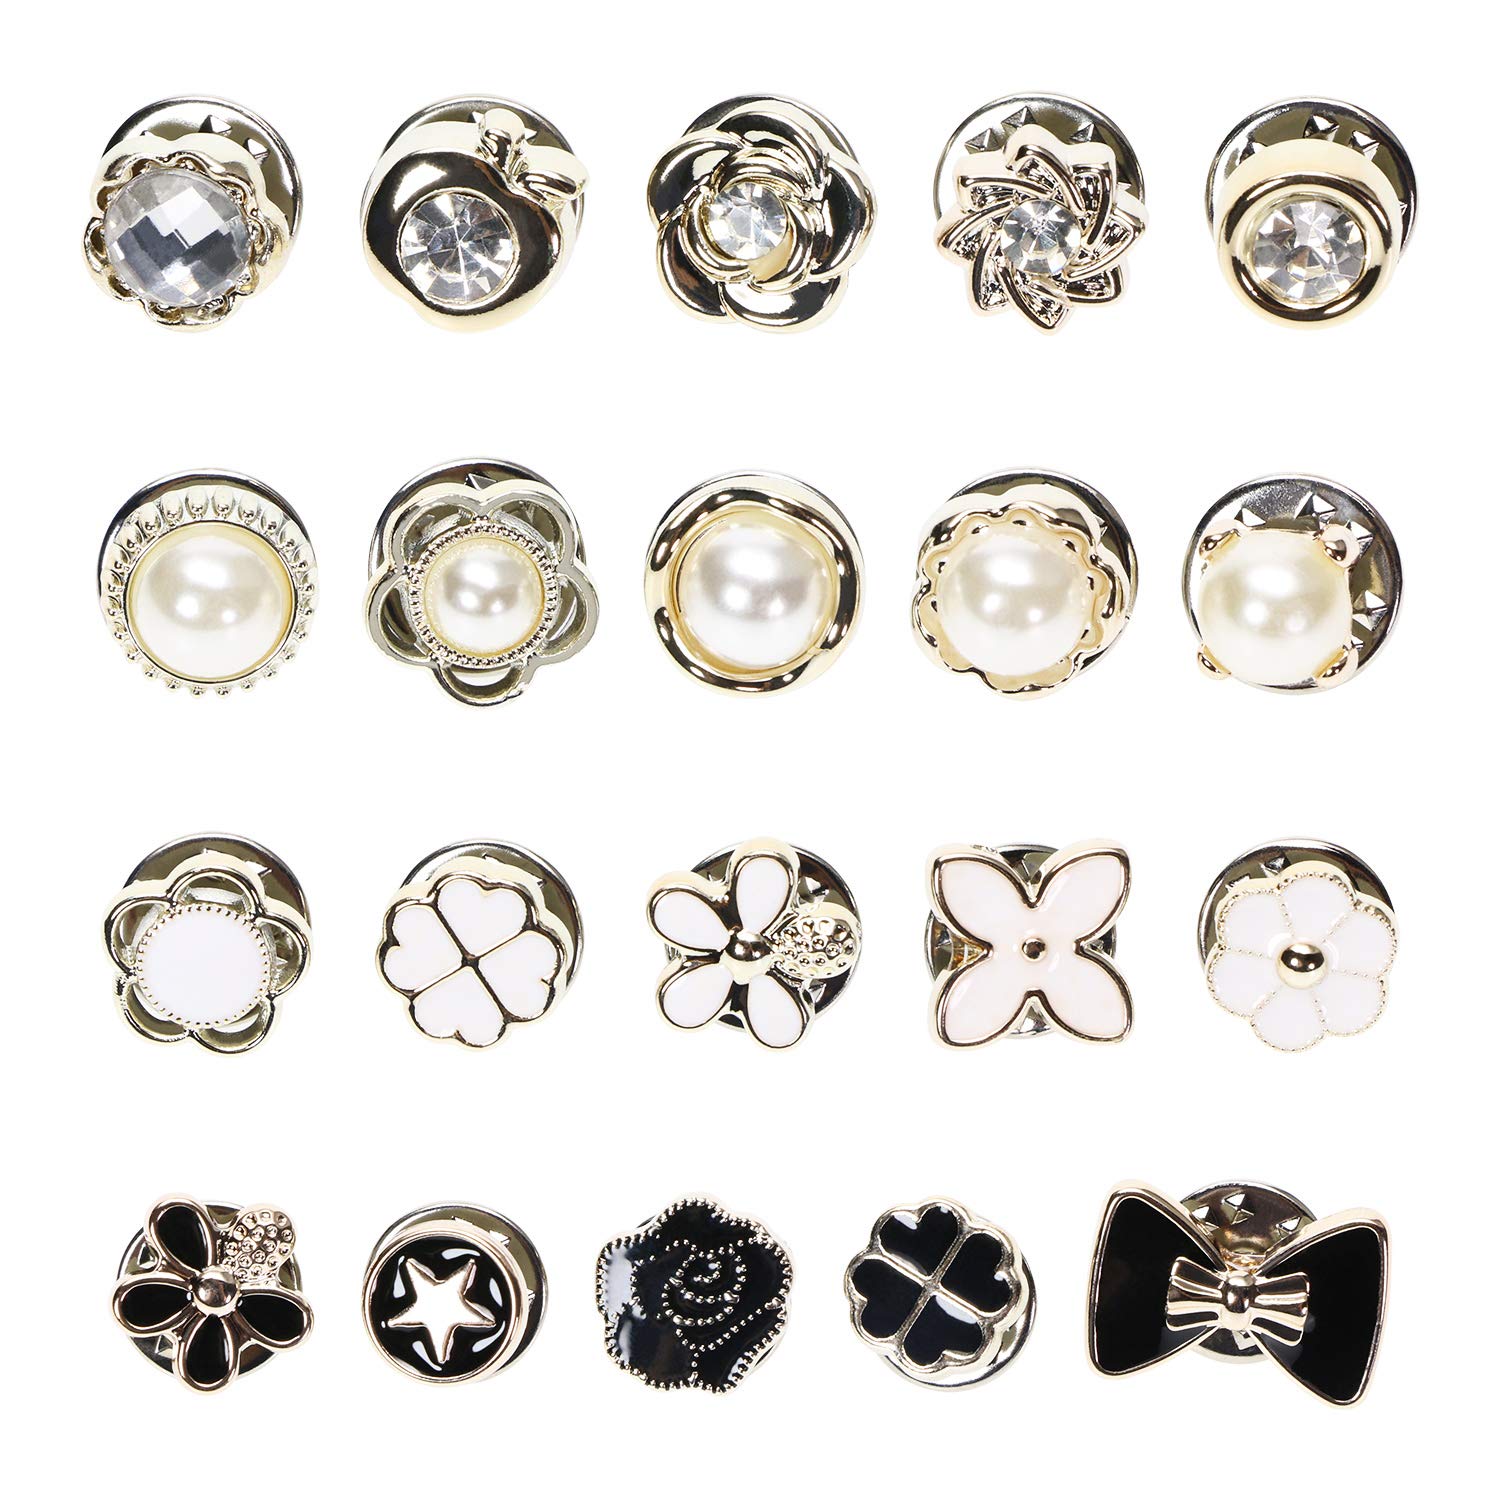 ✇ INS Brooch Pin Safety Pin for Dress Anti-exposure Button Good